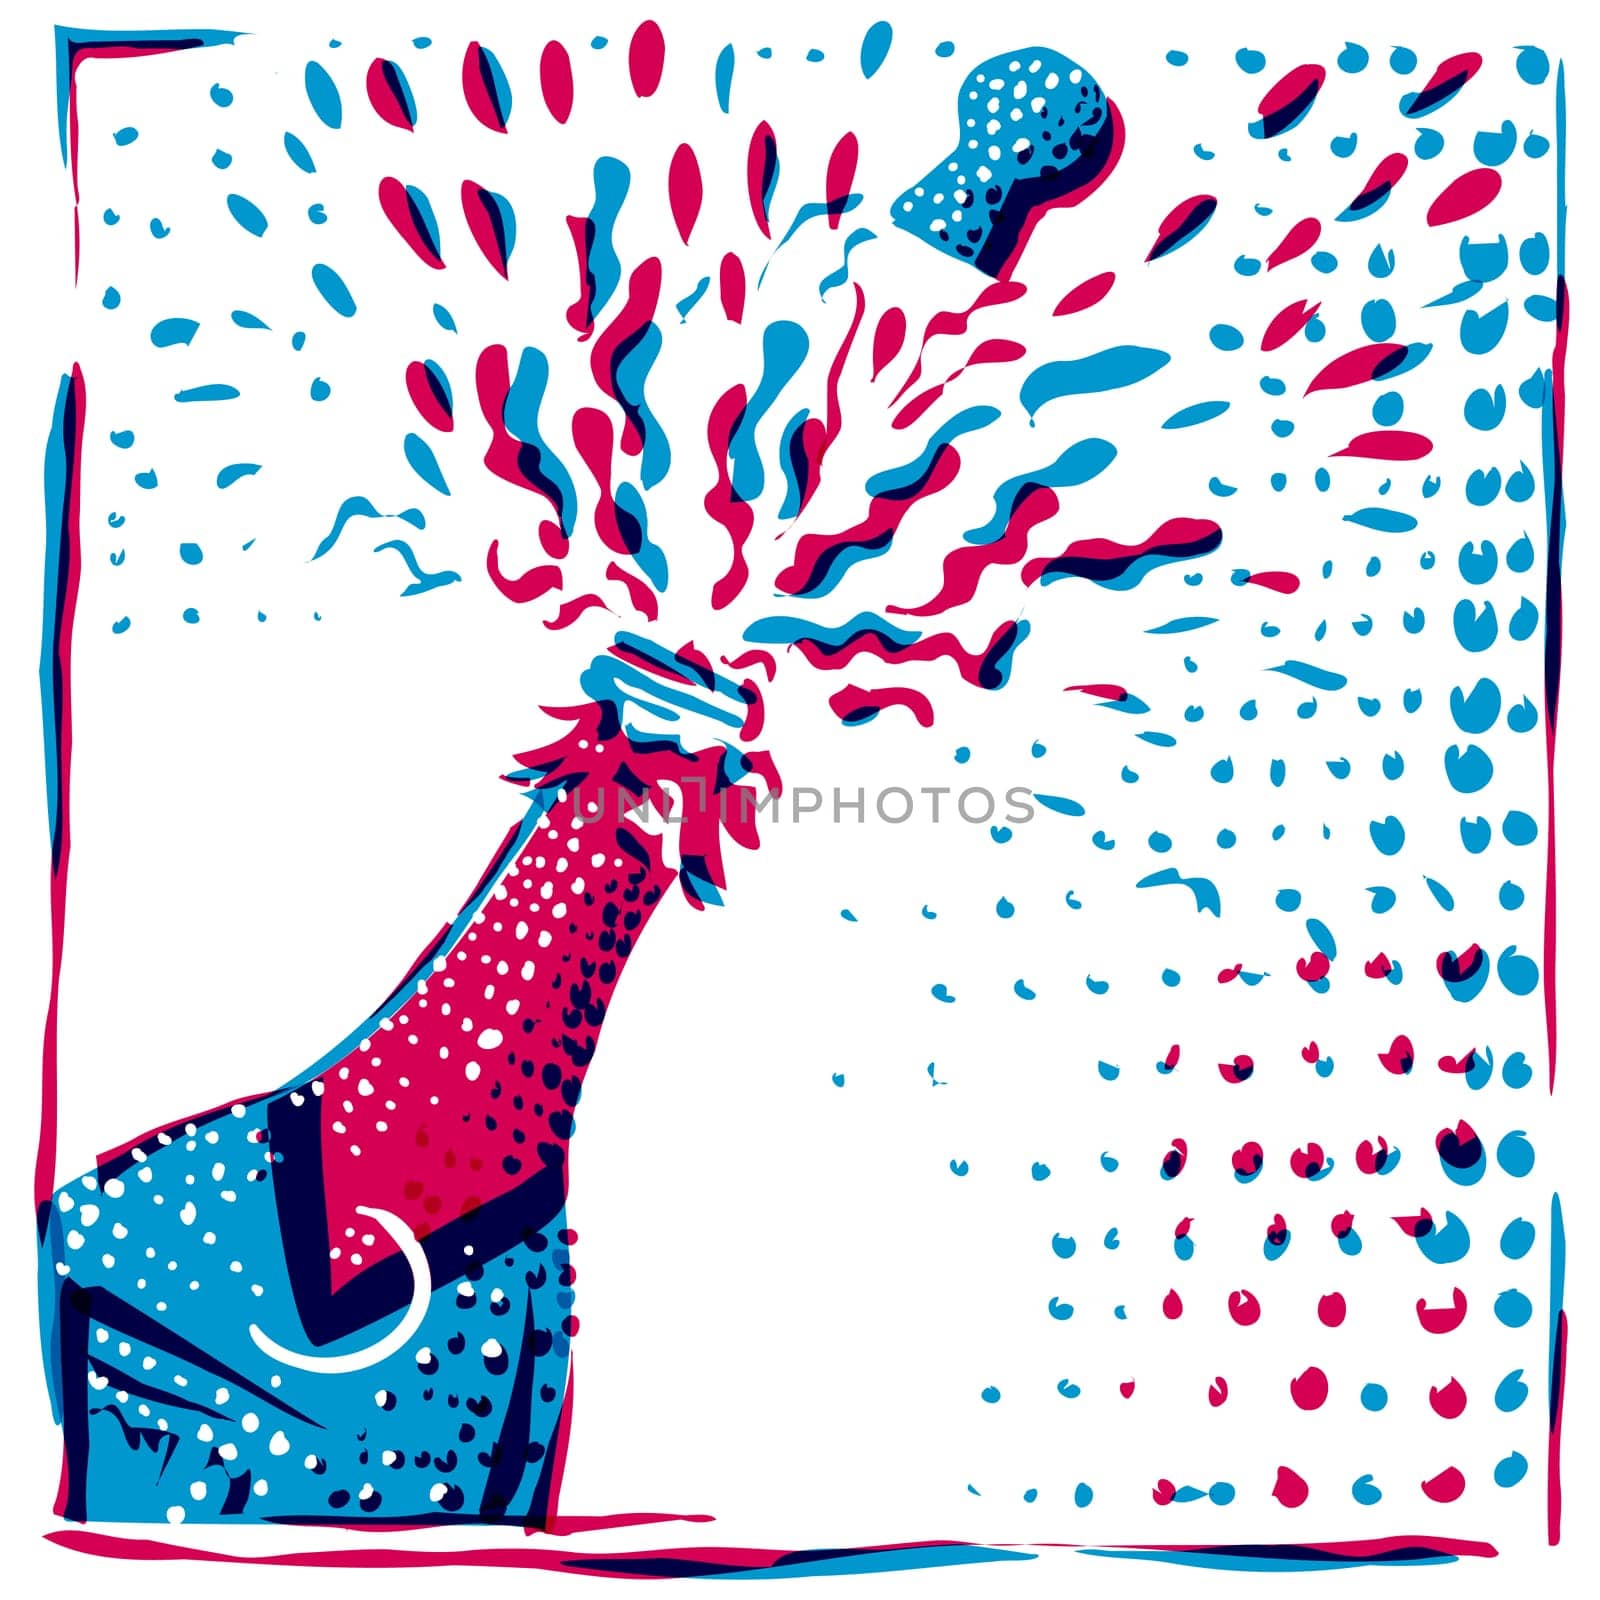 Risograph technique illustration of a bottle of champagne wine popping celebration in retro riso effect digital screen printing style.
